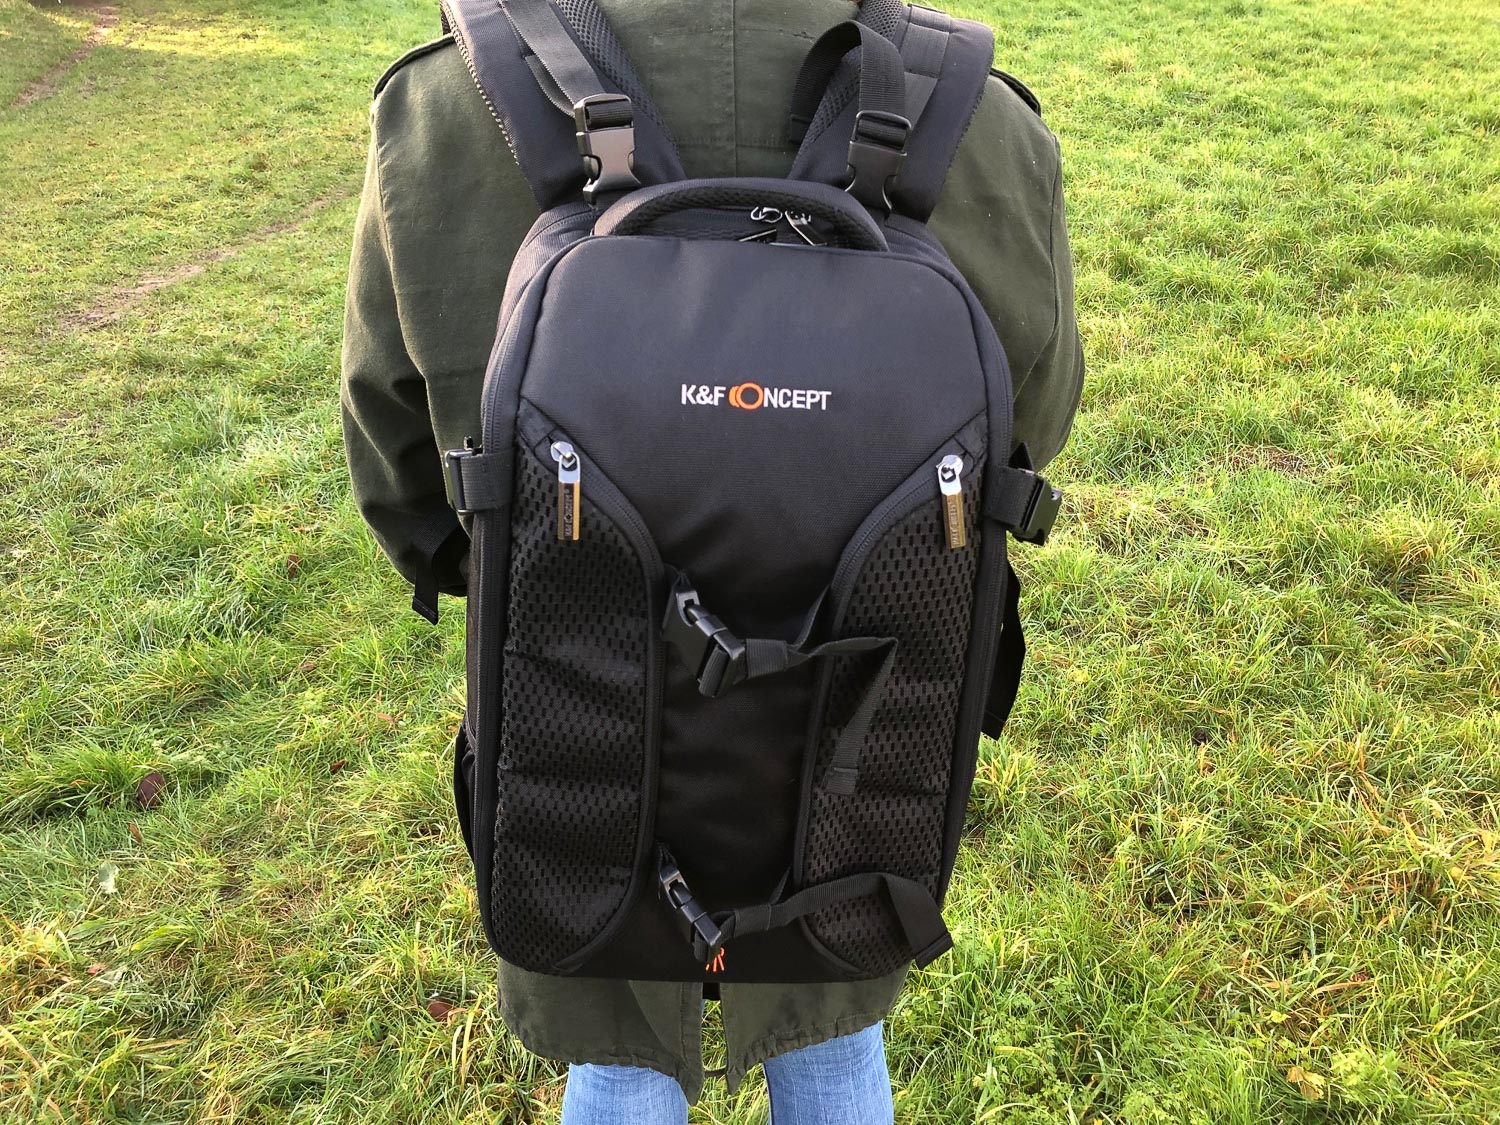 Gear review: 3 K&F Concept Camera Bags Put To The Test